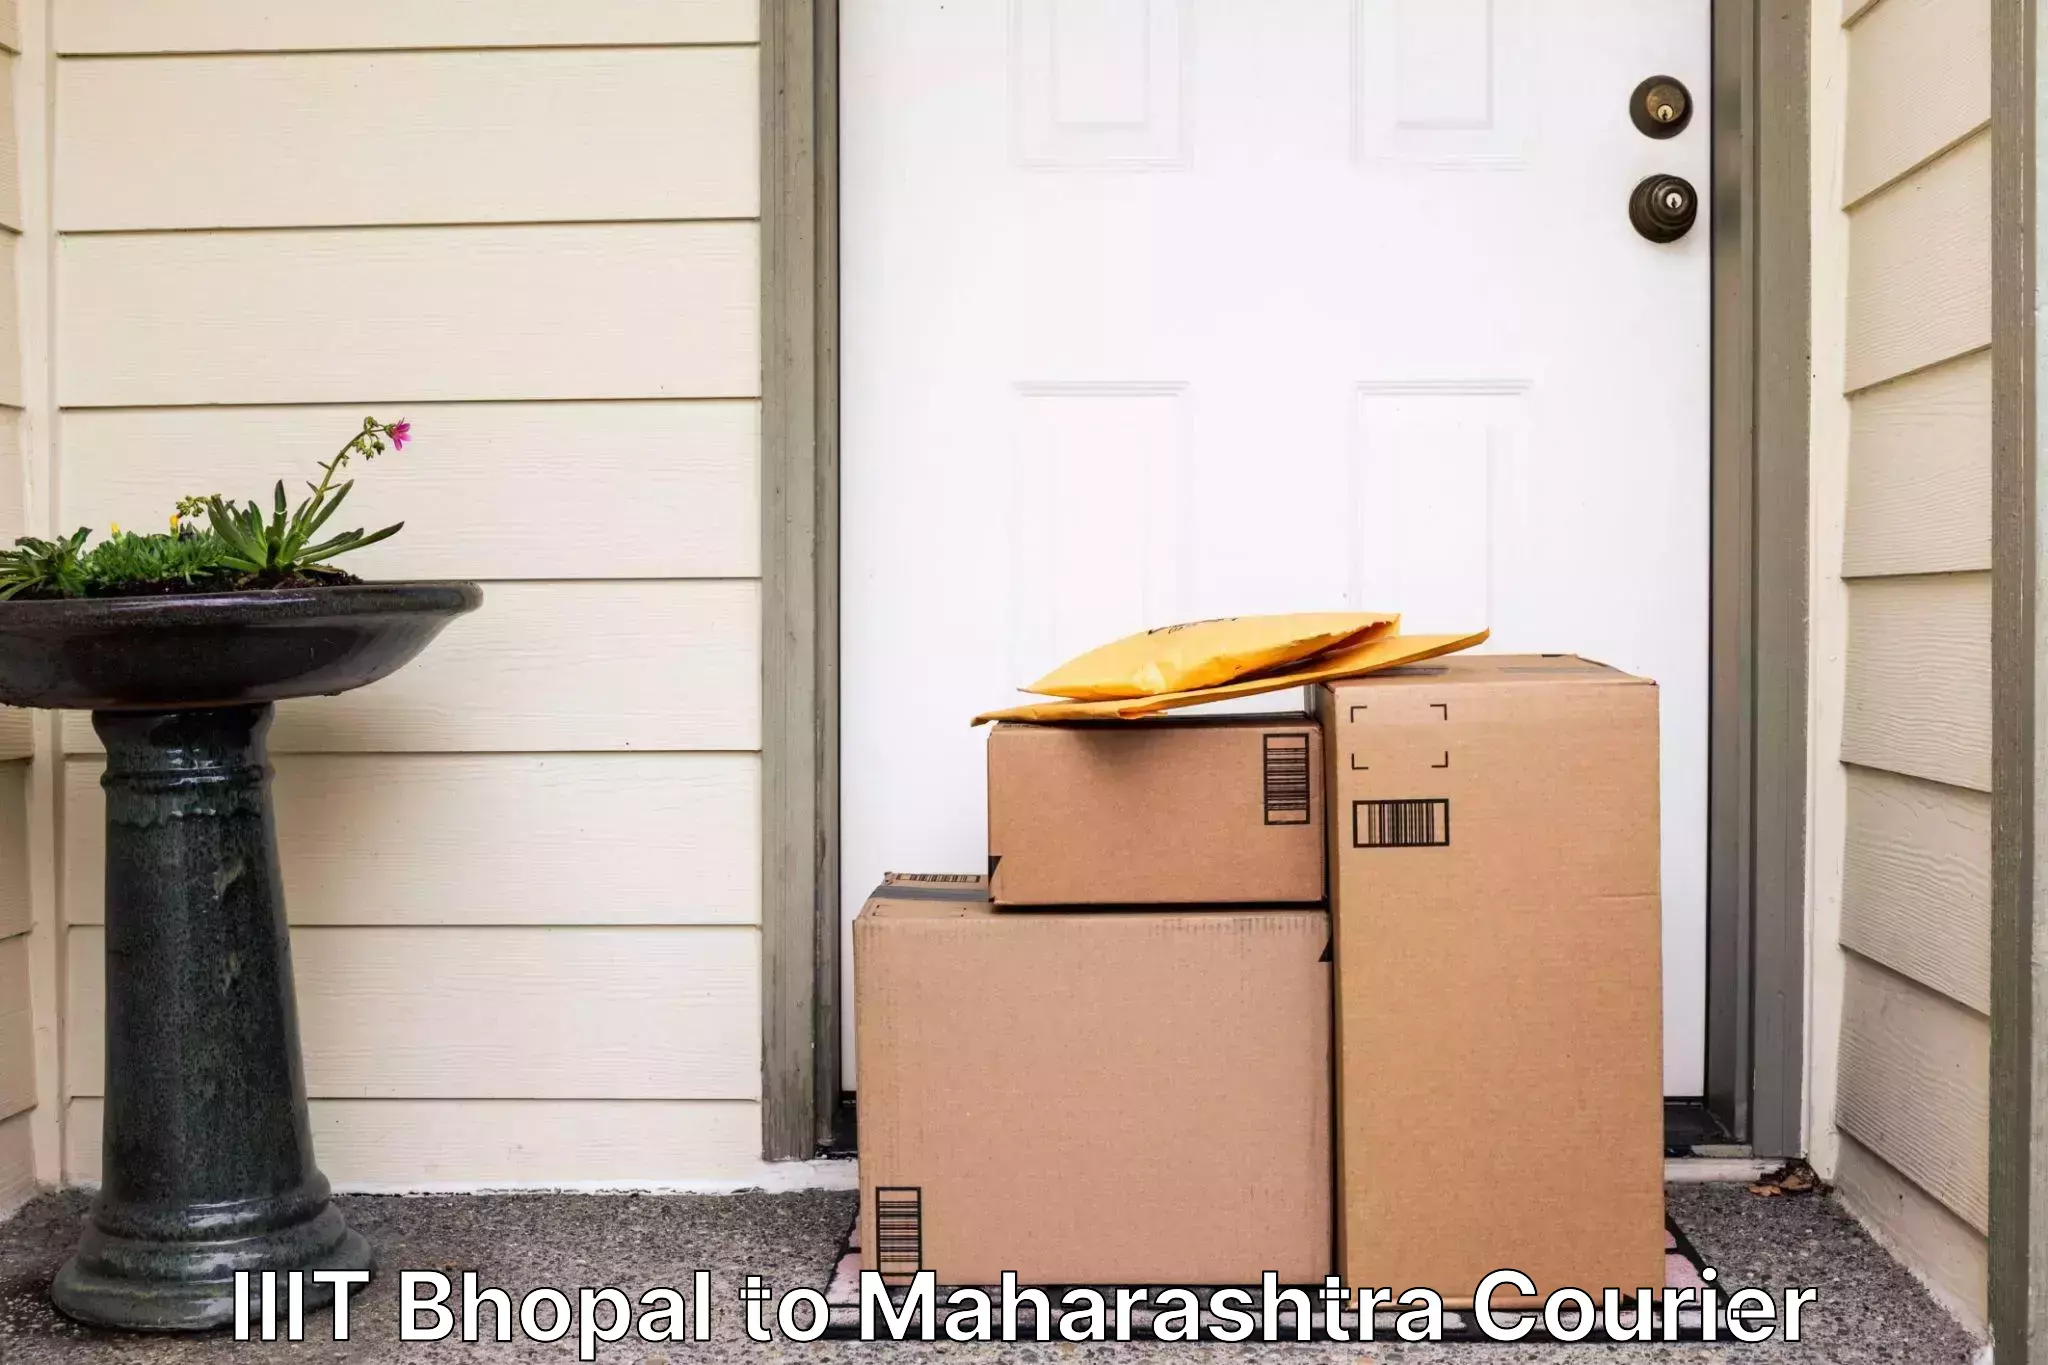 Round-the-clock parcel delivery IIIT Bhopal to Maharashtra